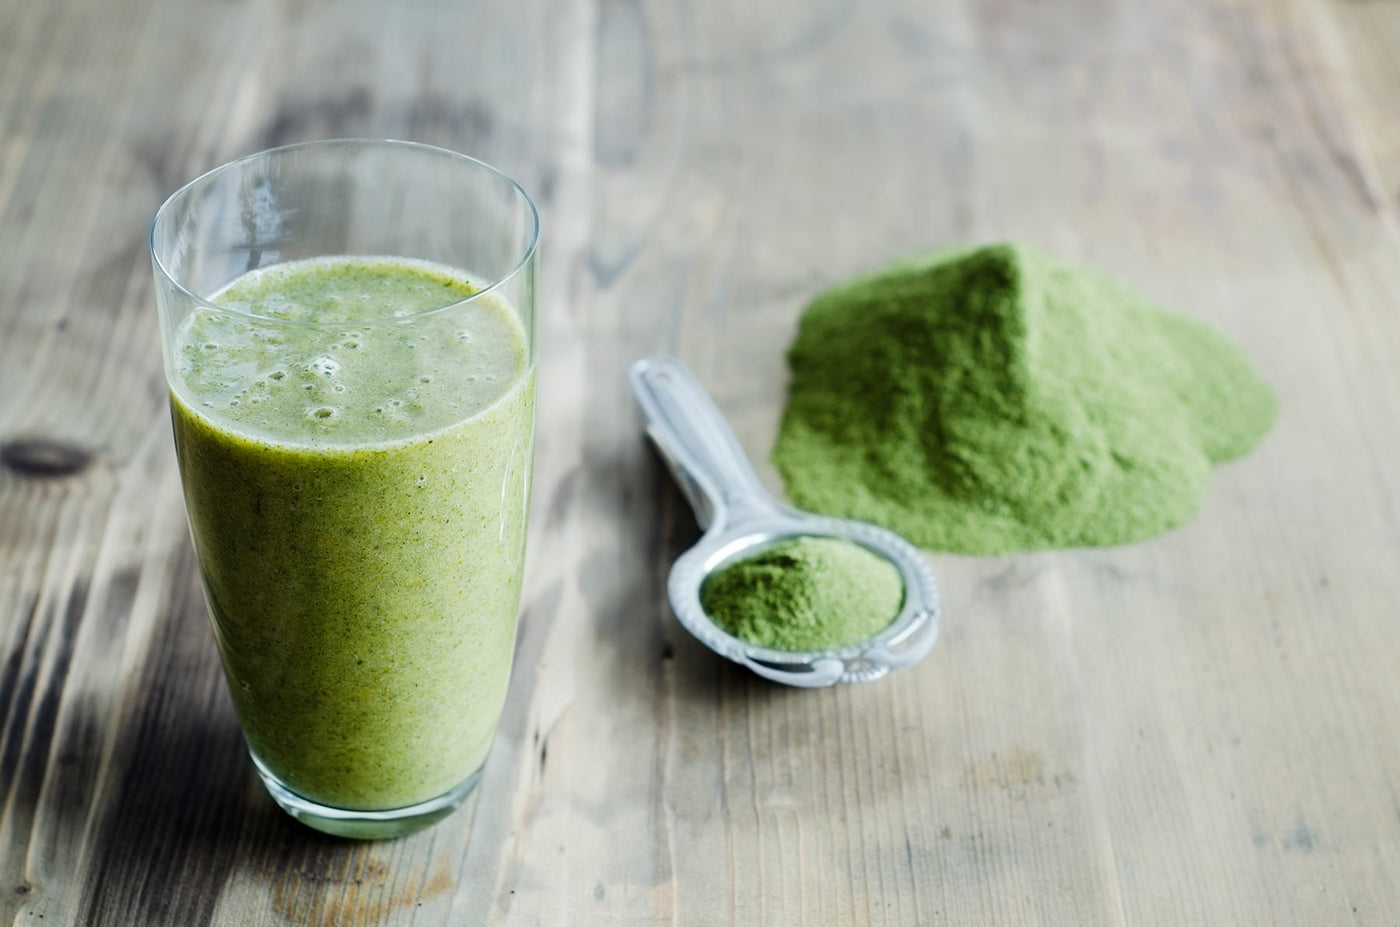 Moringa: Superfood Health Benefits and Ways to Add it to Your Routine